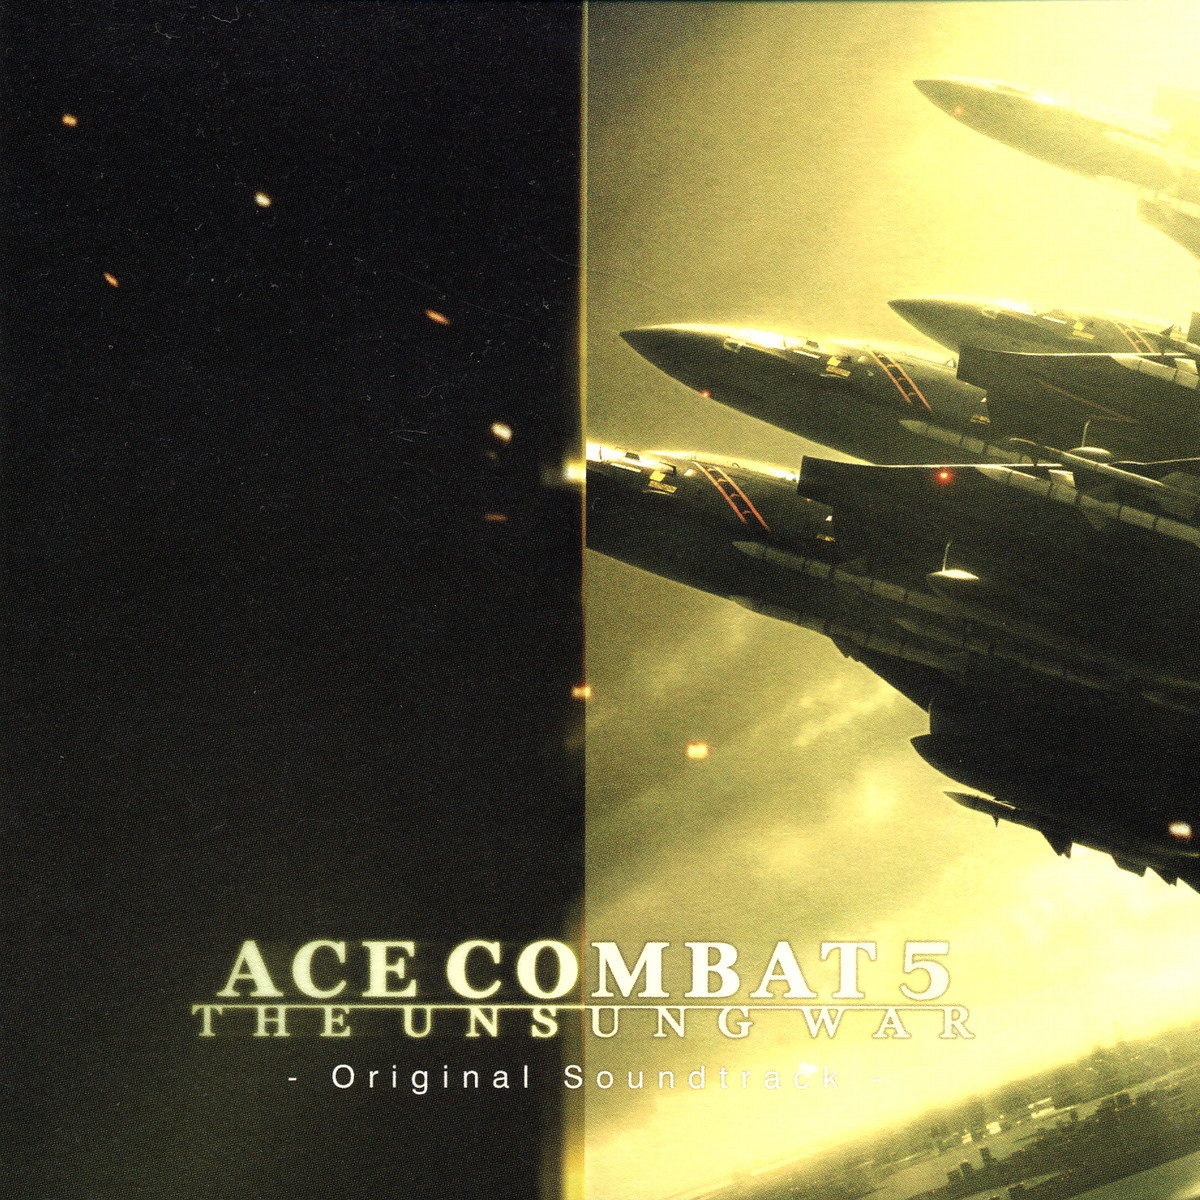 The Journey Home " ace Combat 5 Ending Theme"